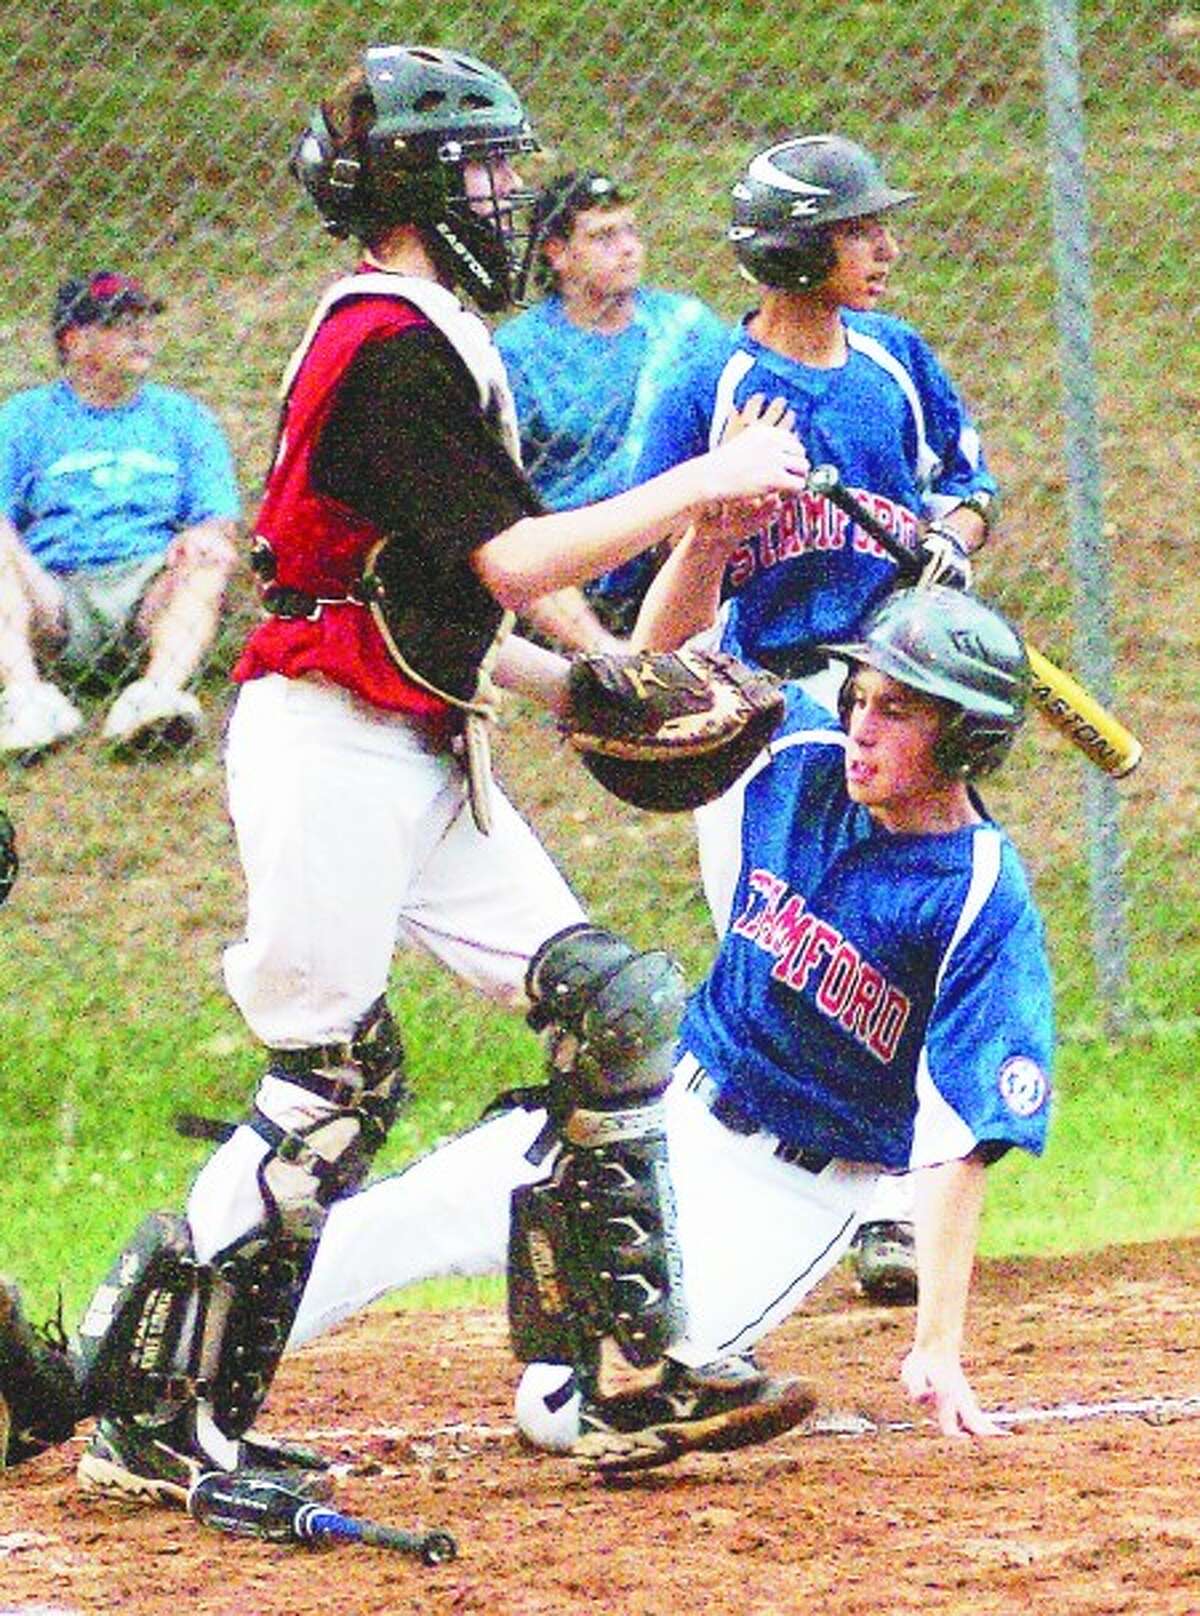 Stamford 13-year-old All-Star Conner Amann slides into home safely against Fairfield during a Babe Ruth State Tournament losers bracket game on Tuesday at Unity Park in Trumbull. Photo/Matthew Vinci